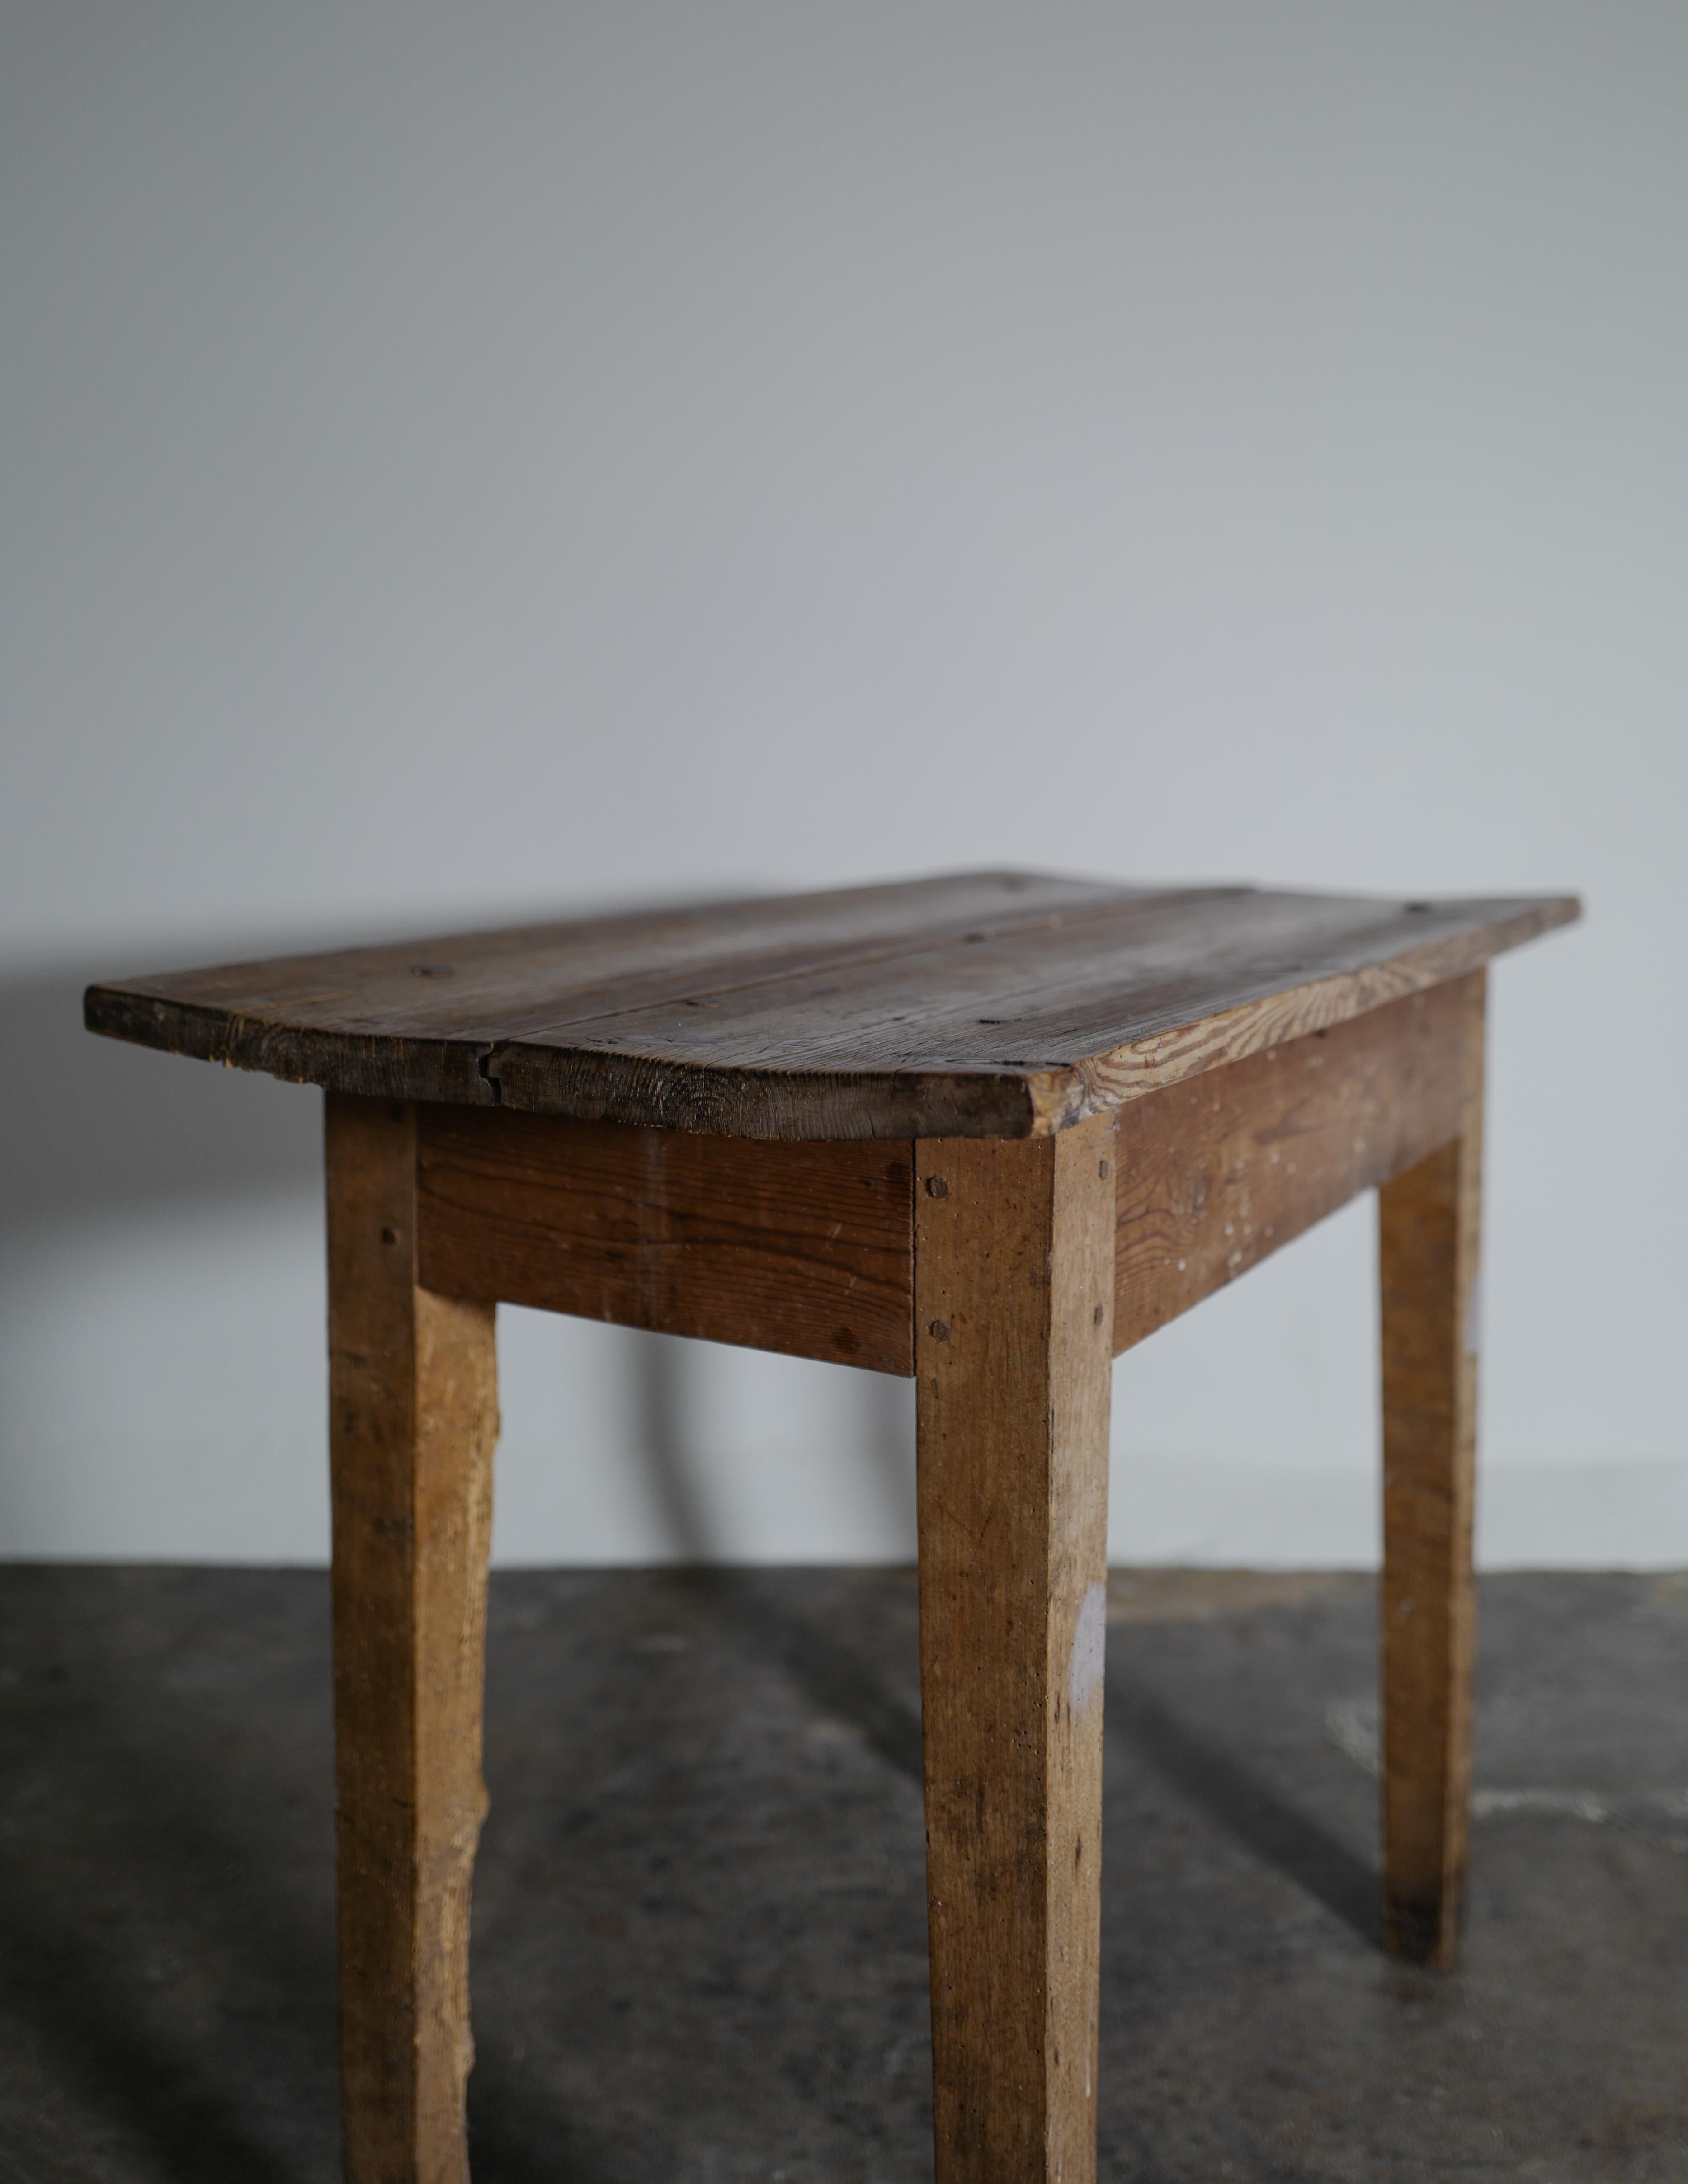 Rare console / side table in a primitive and antique style made in Sweden, late 1800s. In good vintage condition with lot of character, patina and feel from use over time. Stabile and rustic in its construction.